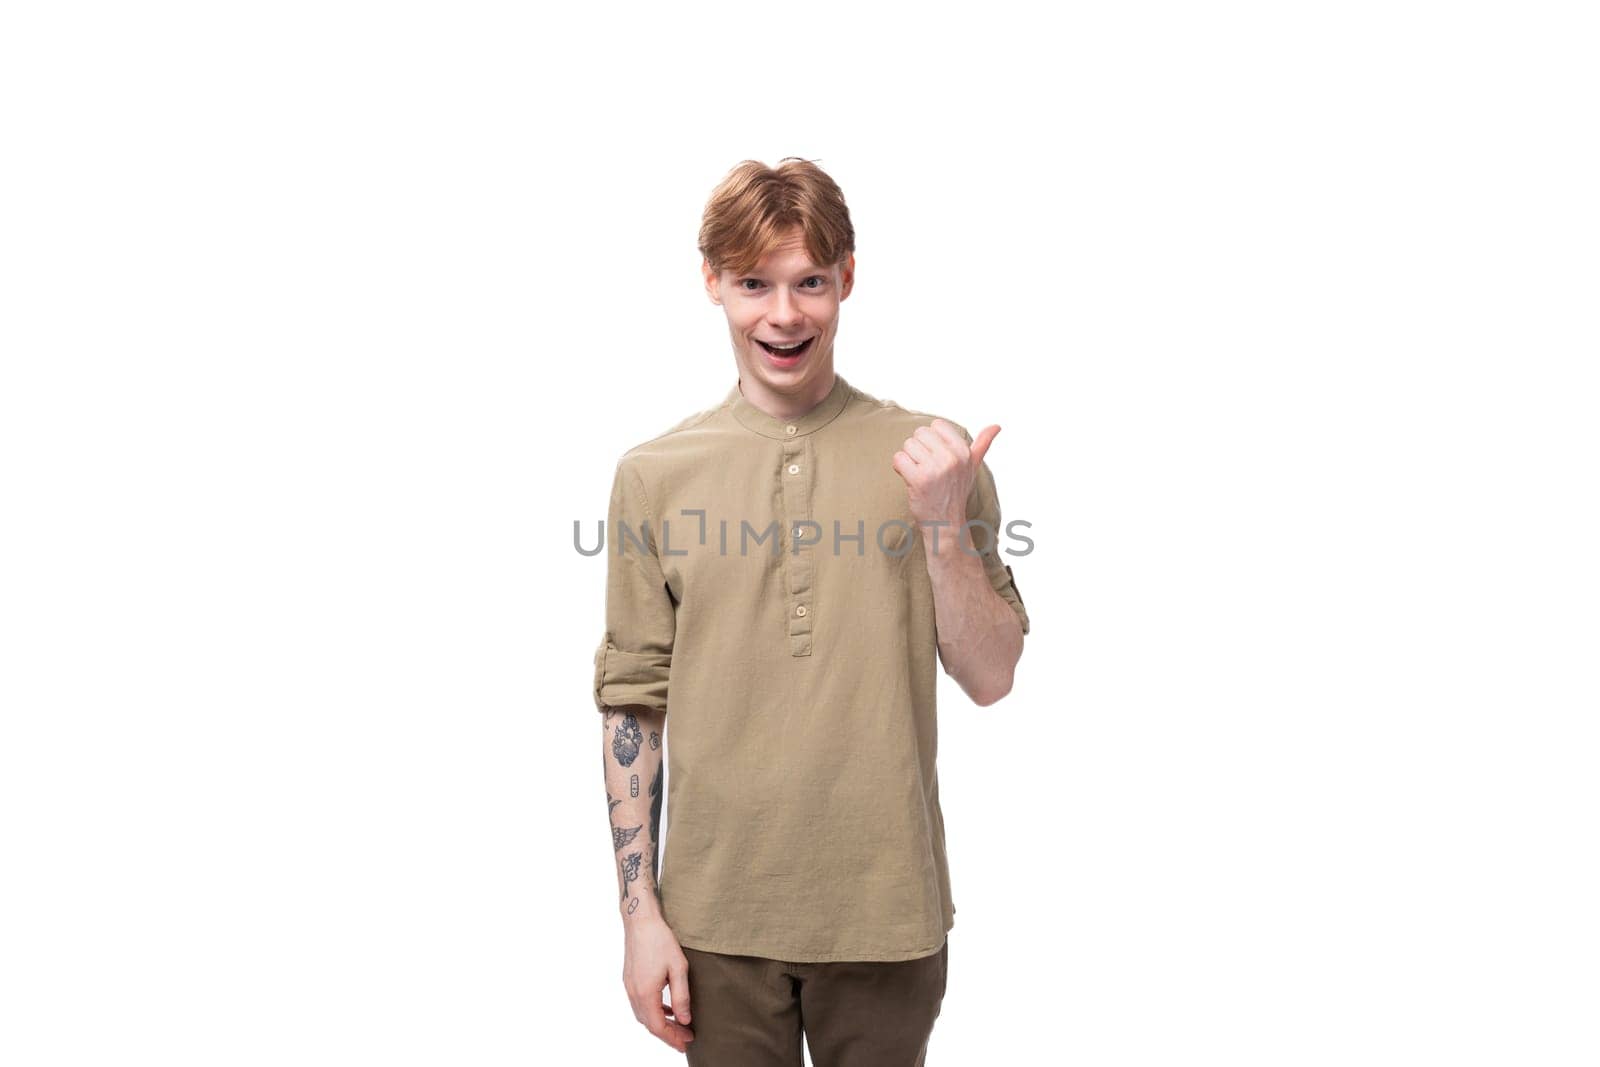 young red-haired man in a beige shirt points his finger to the side on a white background.